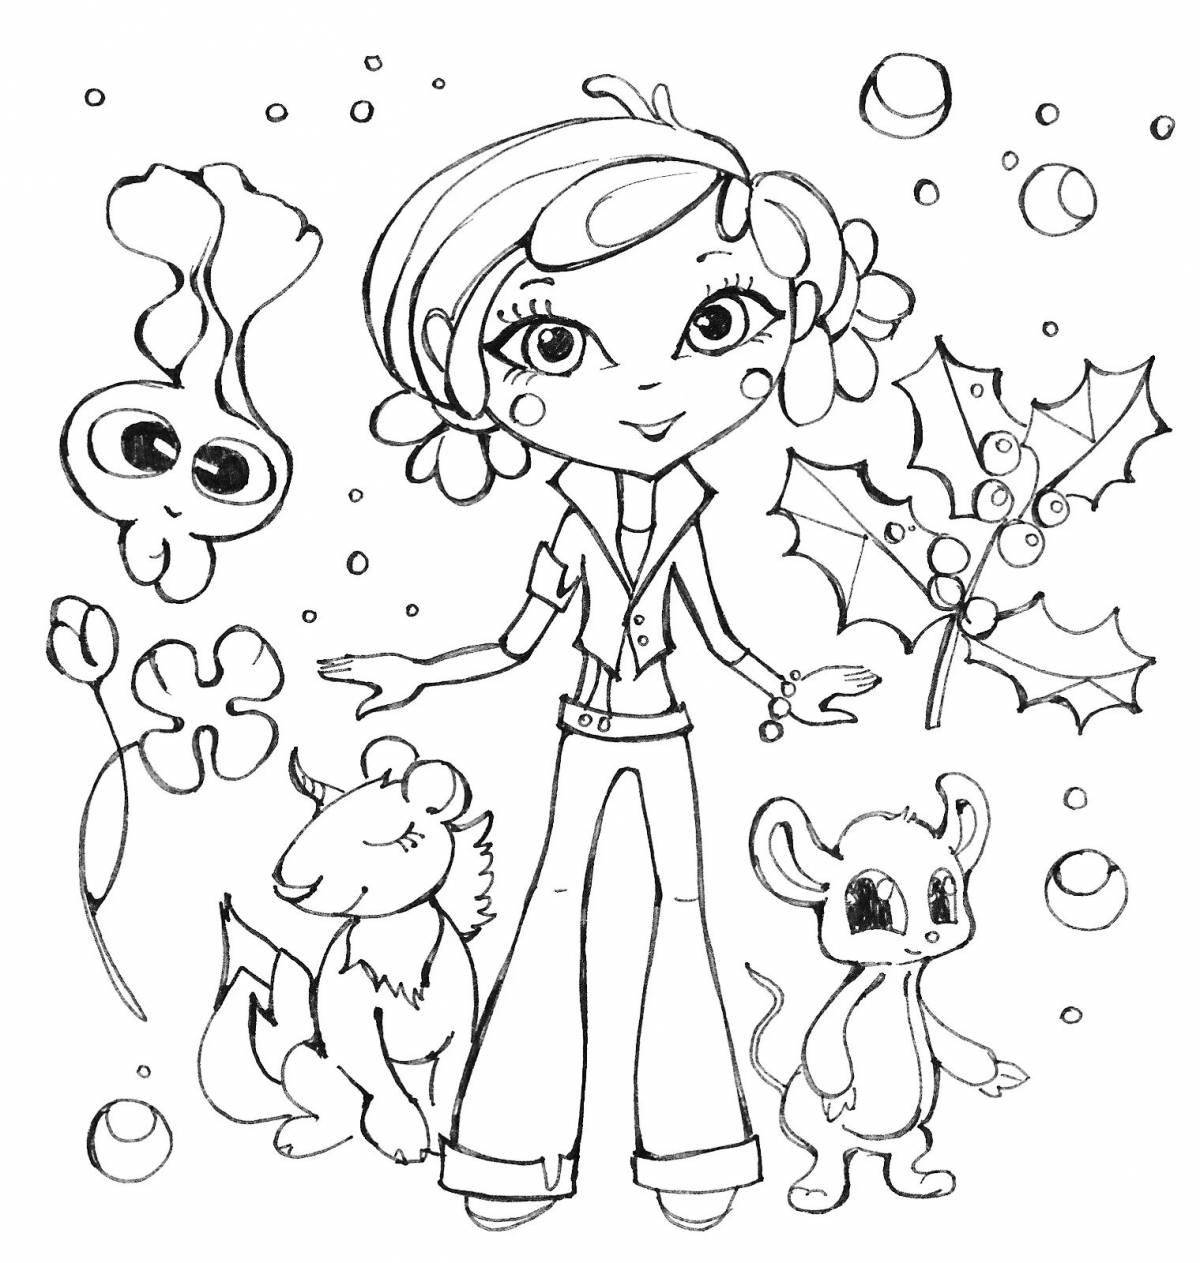 Charon adorable coloring page